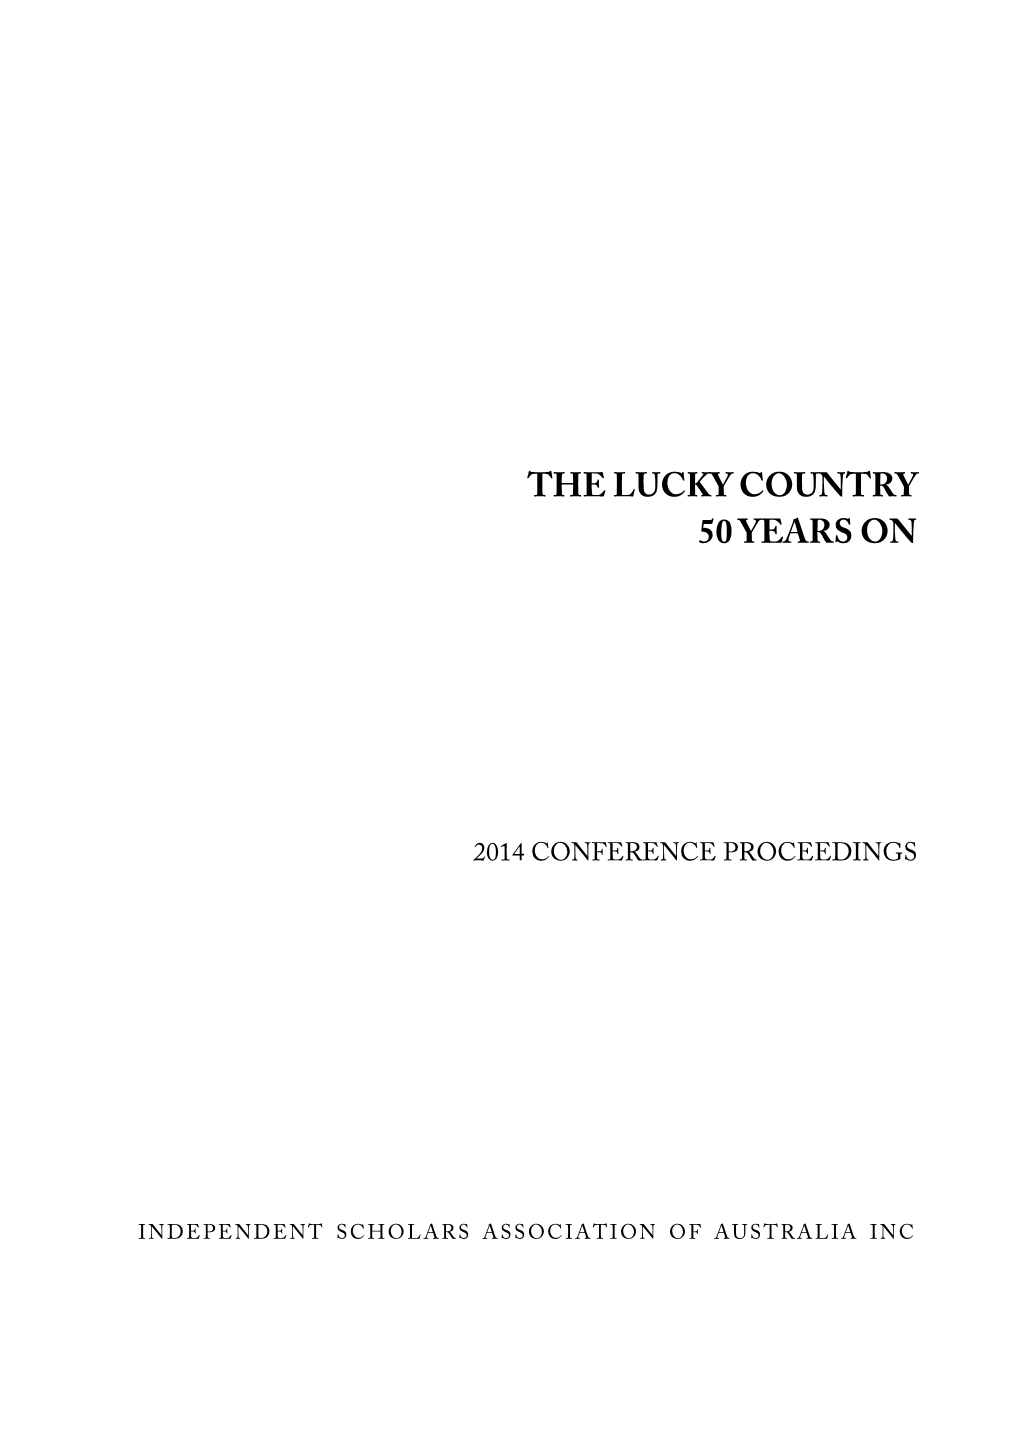 The Lucky Country 50 Years On